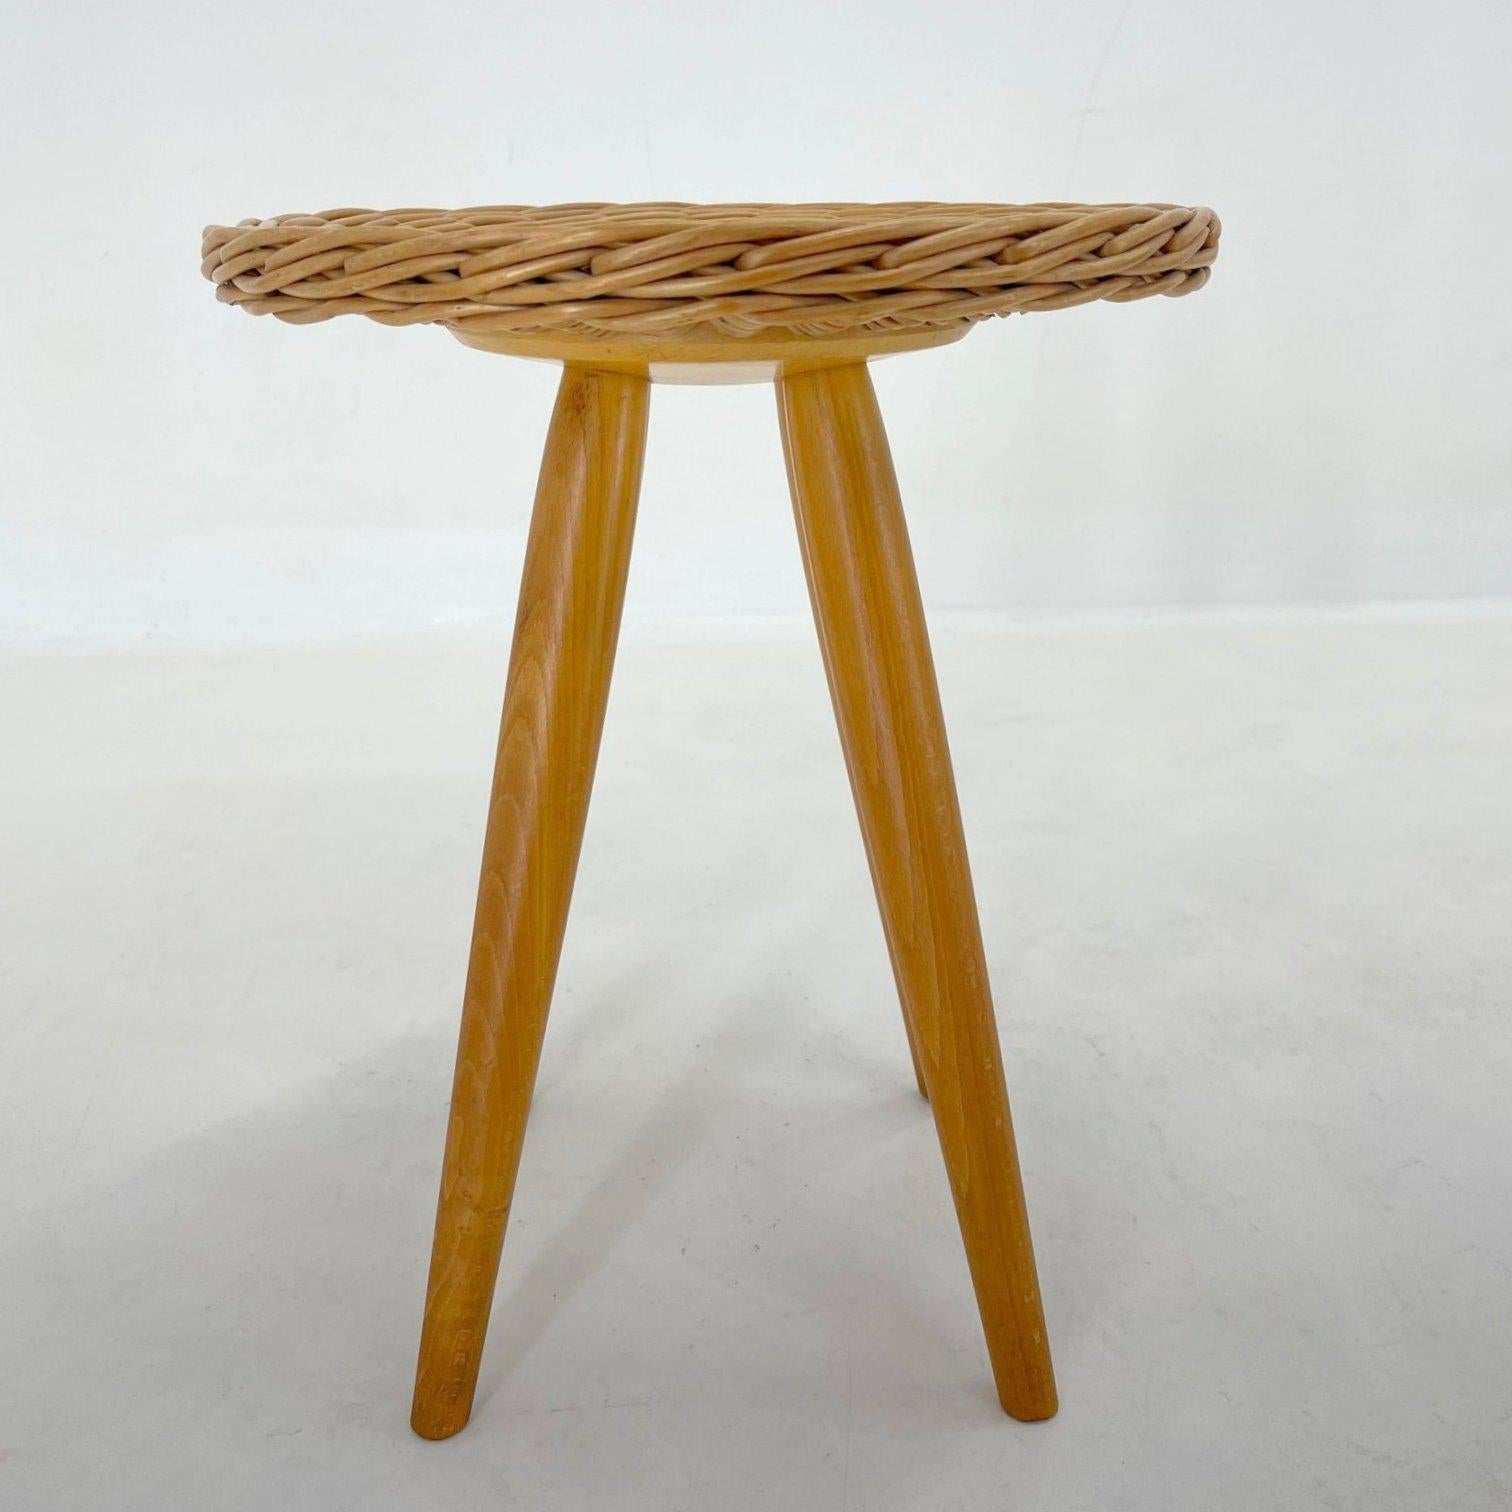 Vintage stool designed by Jan Kalous for ULUV in the 1970's. Very good vintage condition.